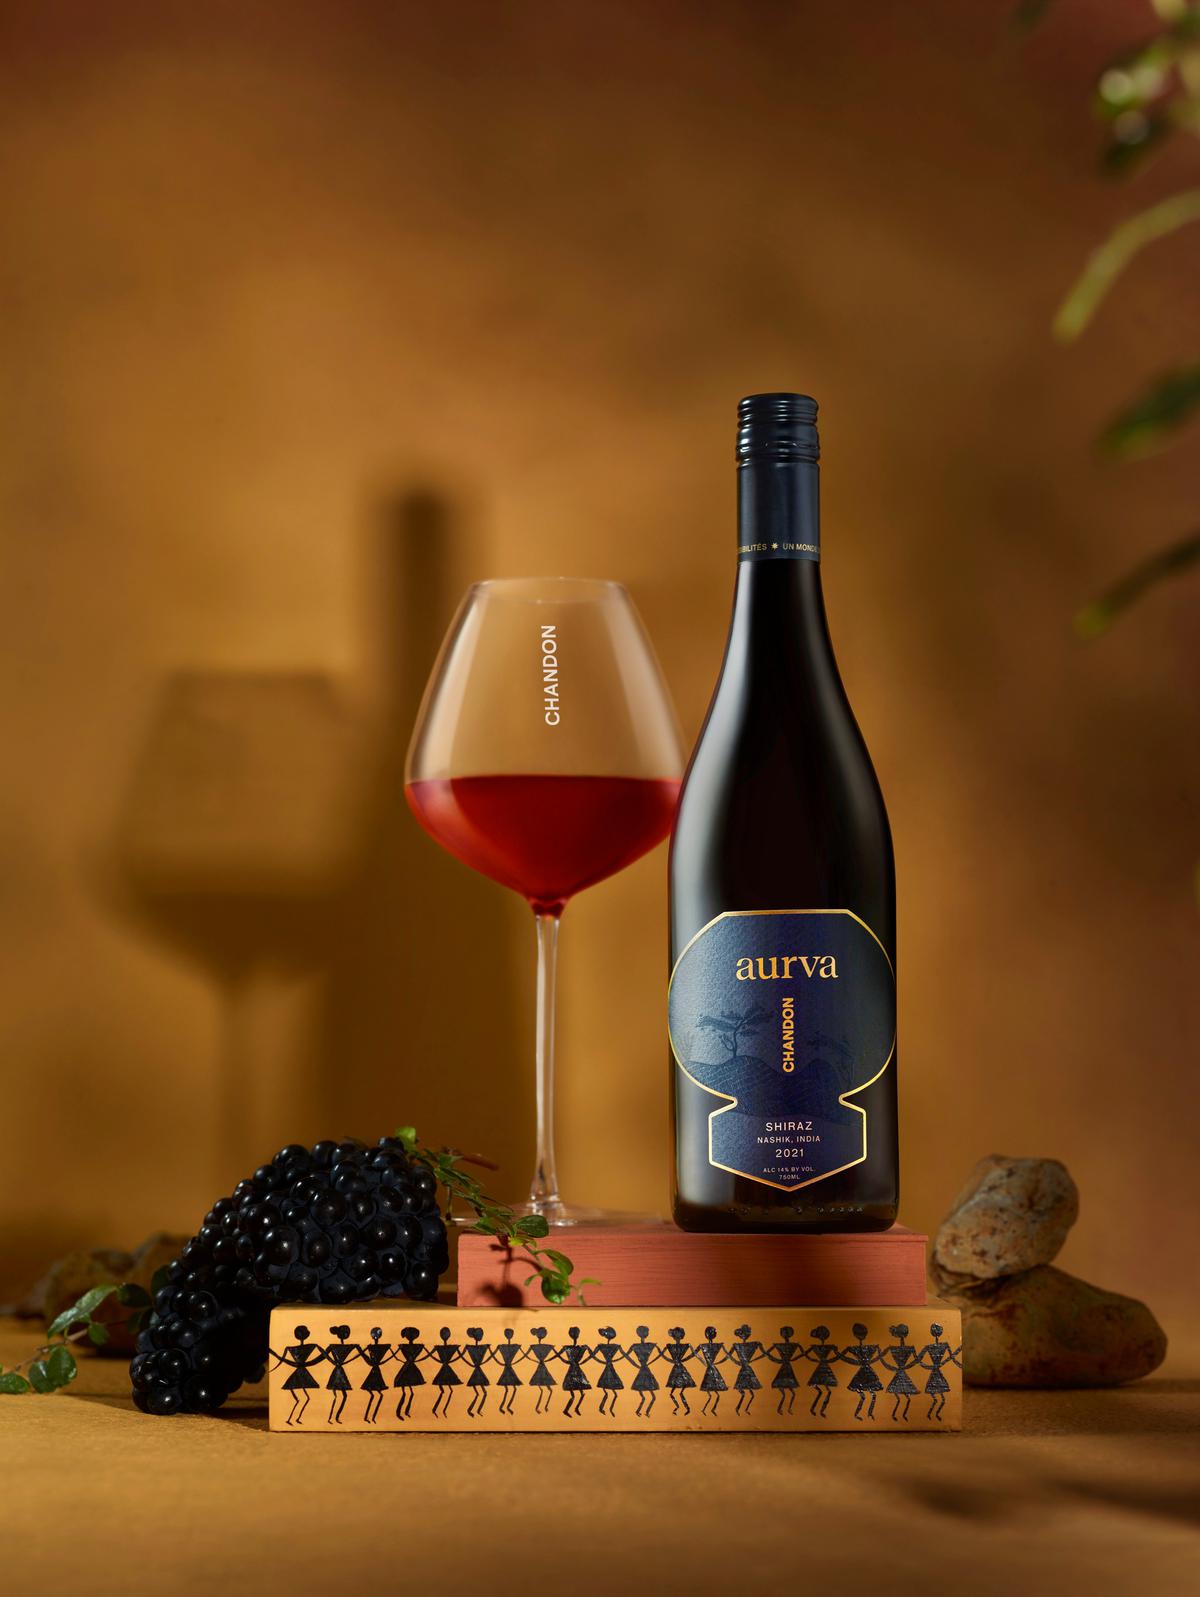 Aurva, the latest offering by Chandon 